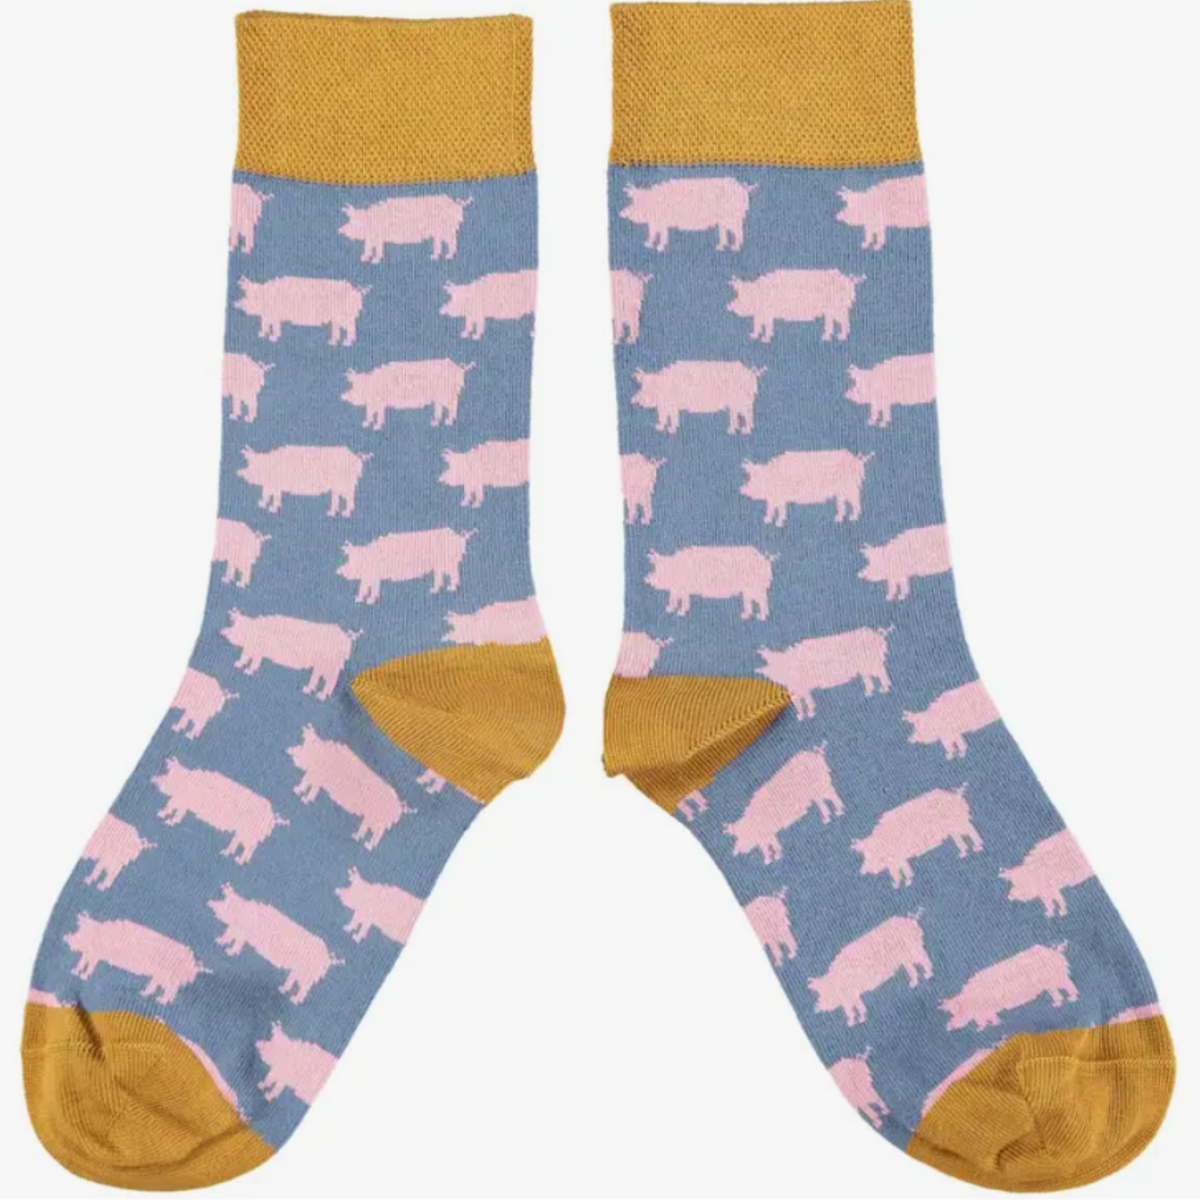 Catherine Tough Pig cotton women&#39;s crew socks featuring pink pigs on a smoky blue background with ginger cuff, heel and toe